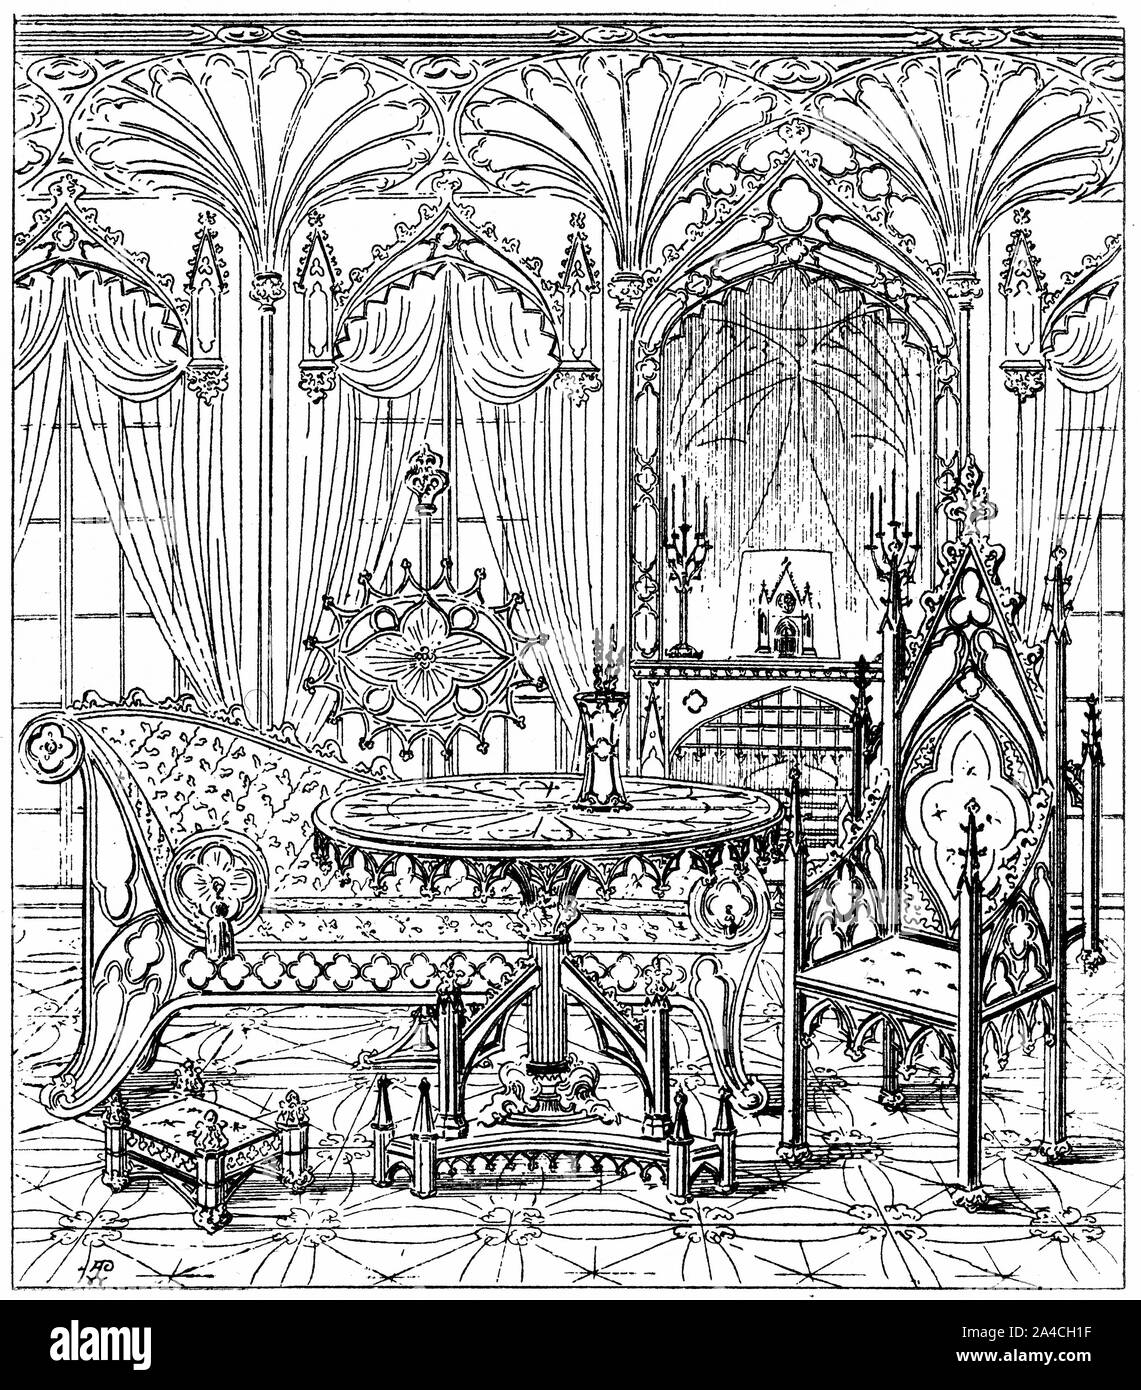 Engraving of the gothic style of decoration in furniture, wall coverings and interior decorating. Stock Photo